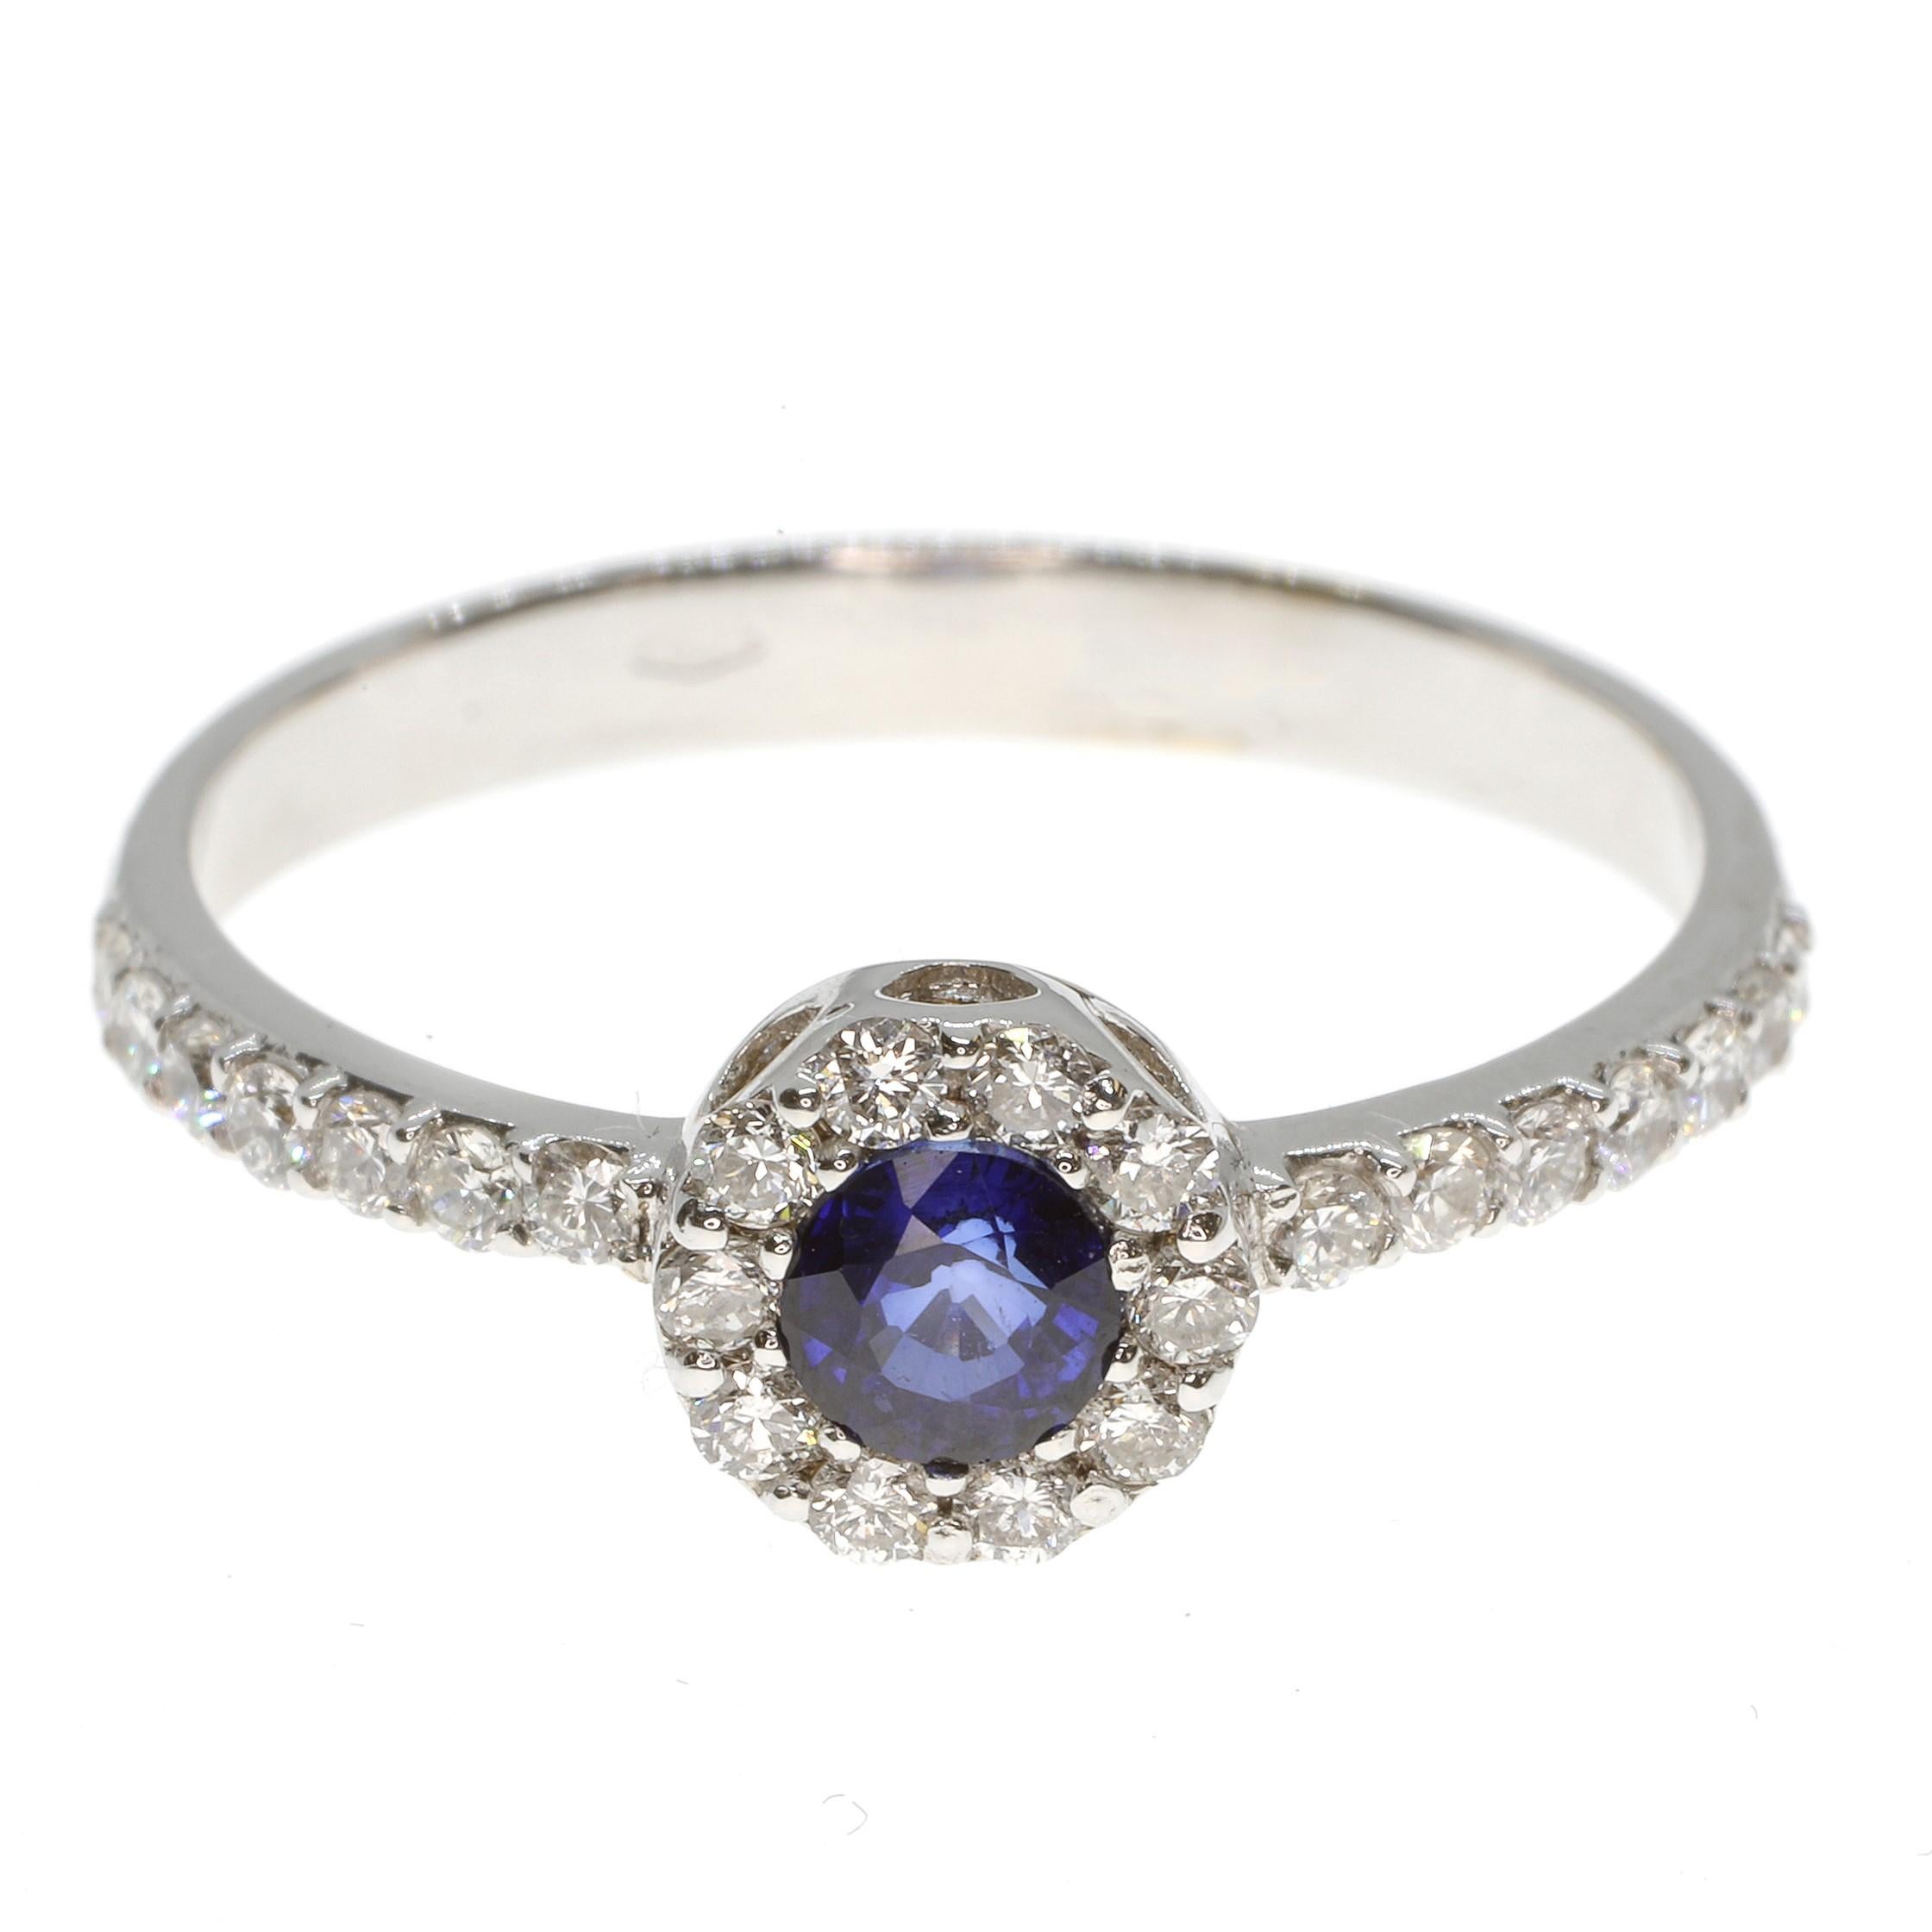 Contemporary 21st Century 18 Karat White Gold, G VS Diamond, Blue Sapphire Ring with Halo For Sale